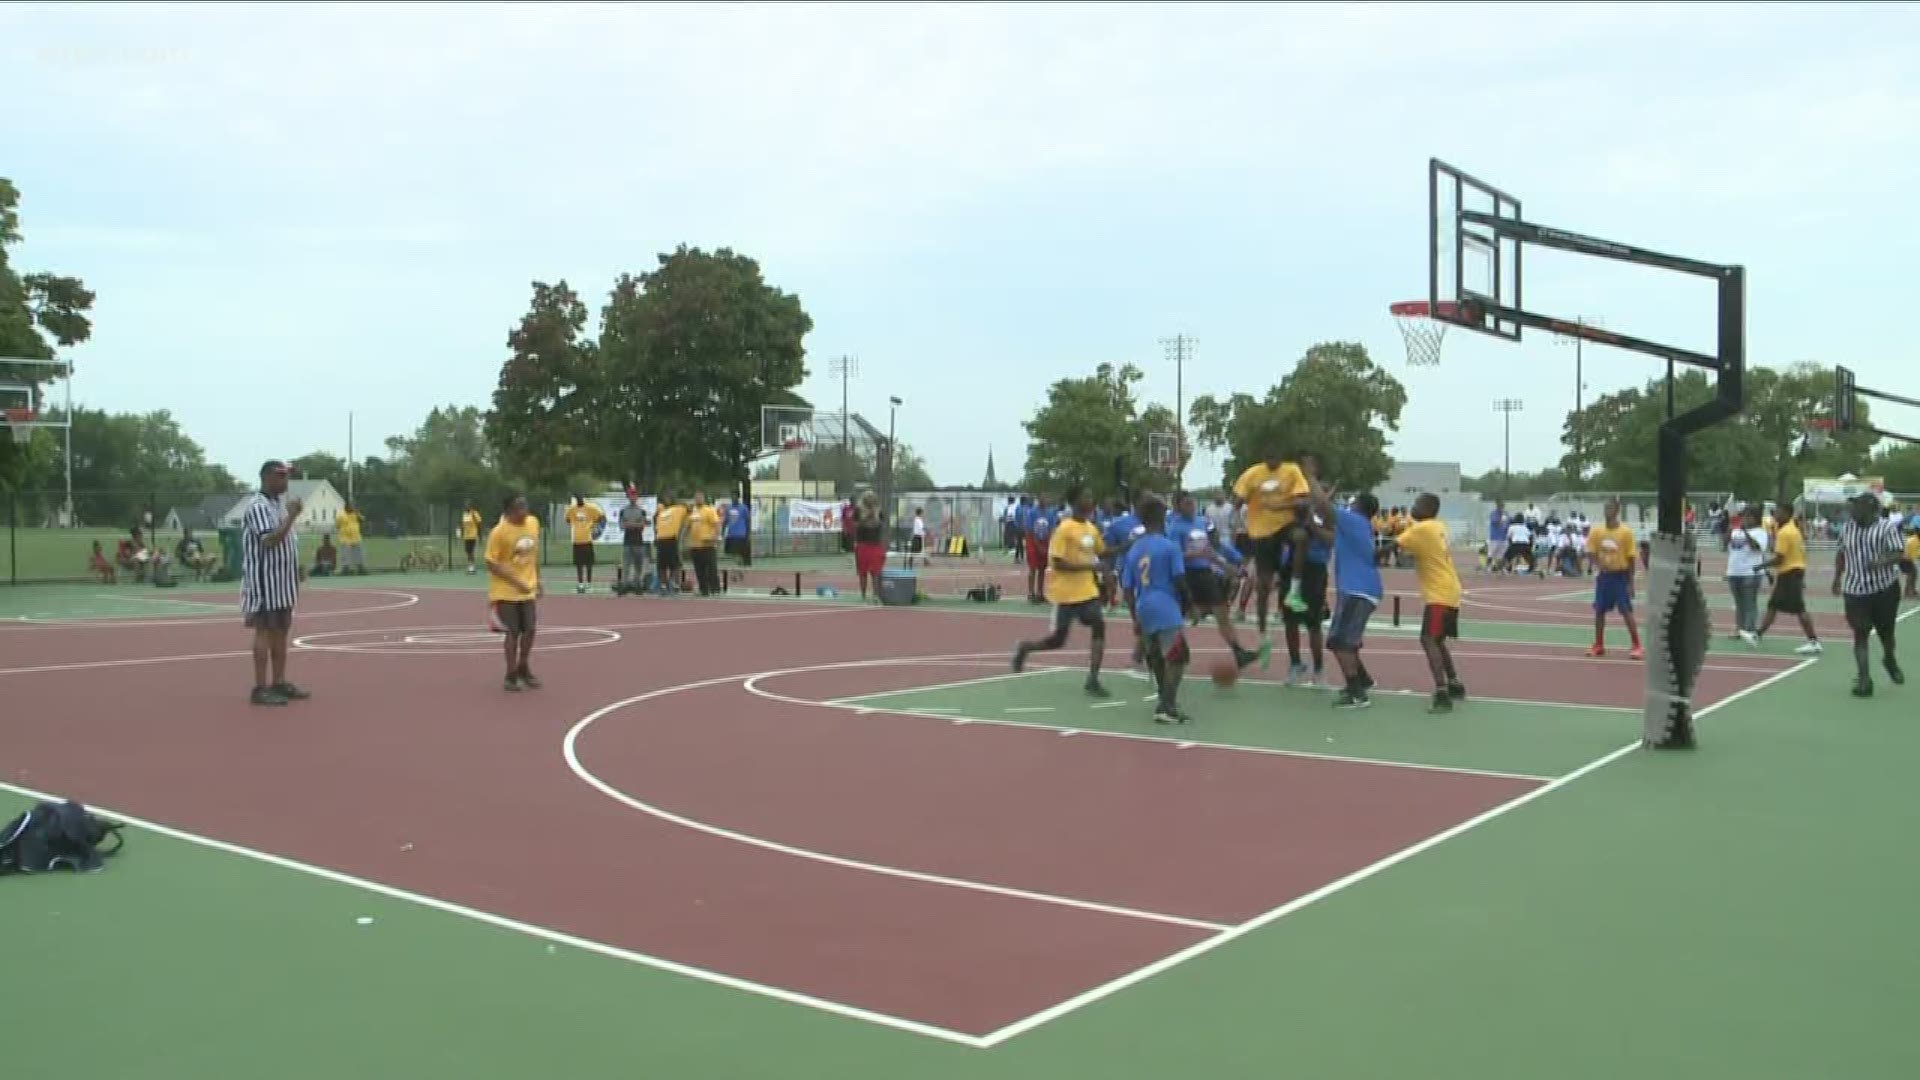 it's a free event for kids around the area... that came about as a replacement after the Gus Macker Tournament moved out of Buffalo.